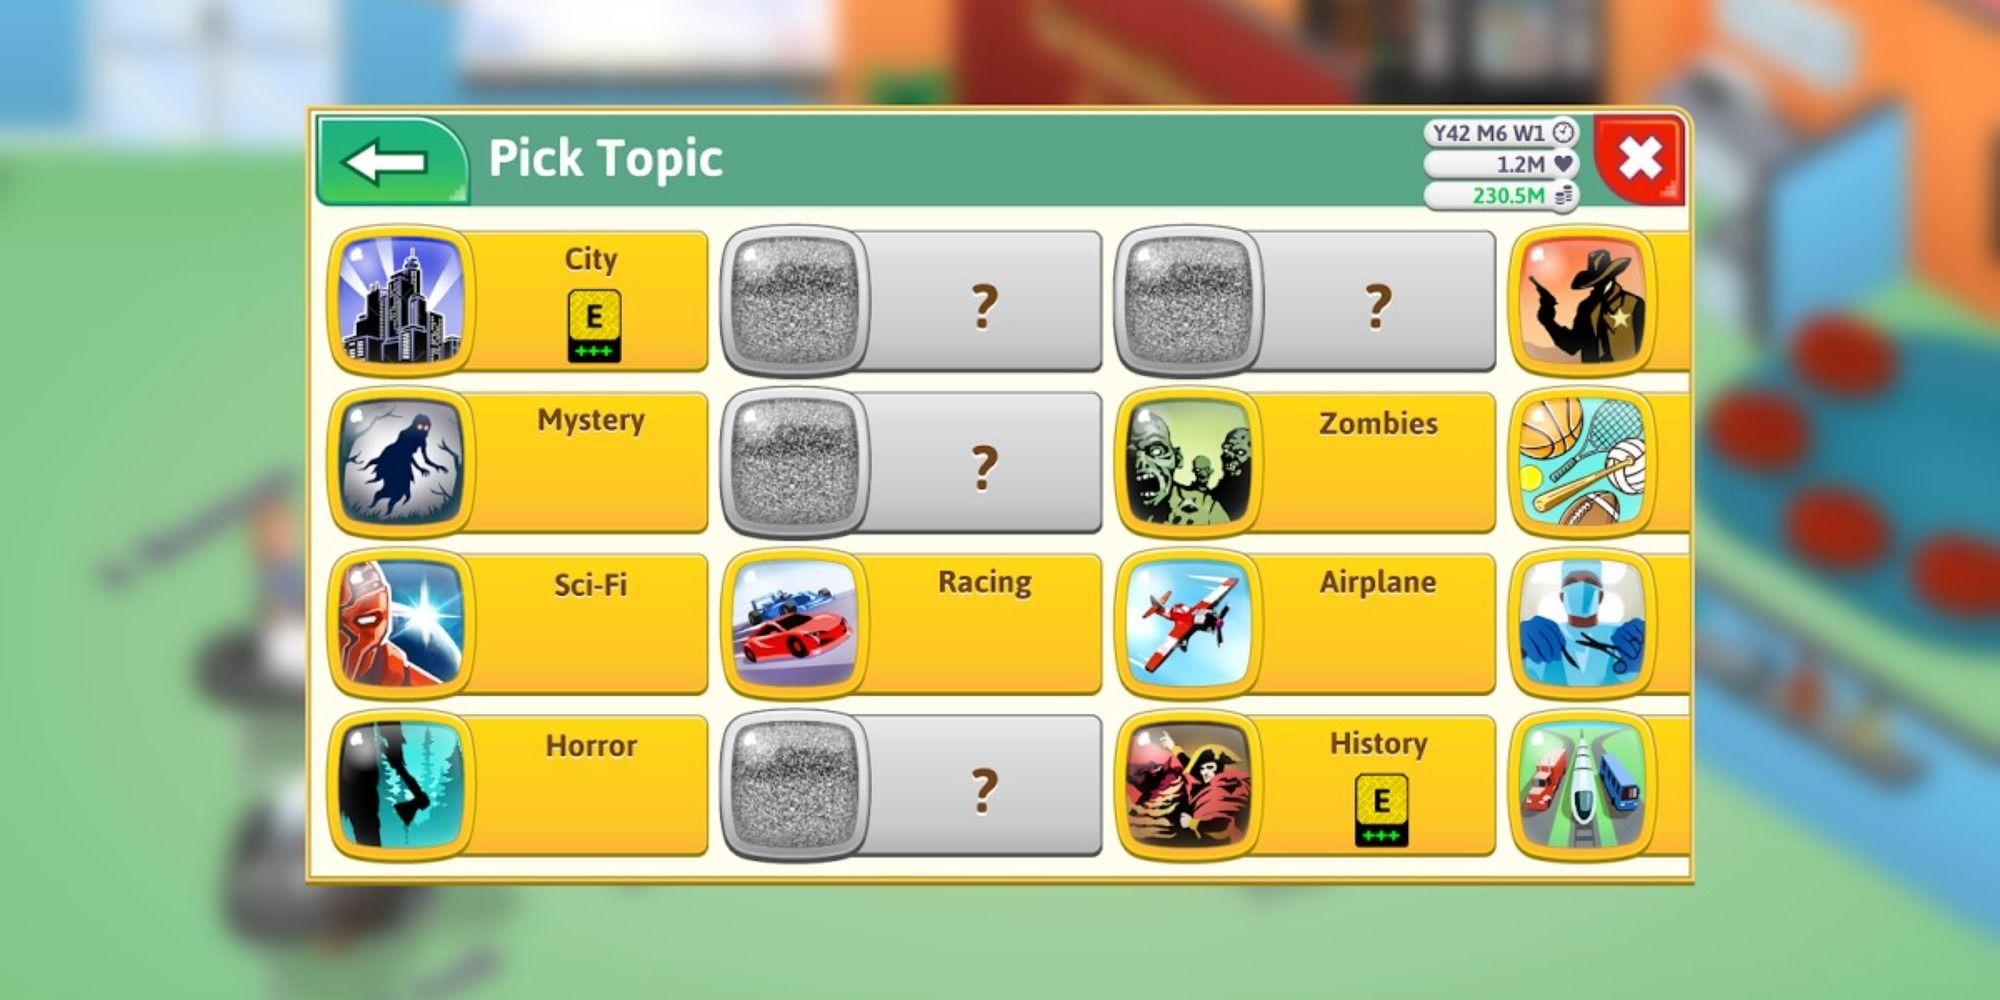 Game Dev Tycoon list of game topics